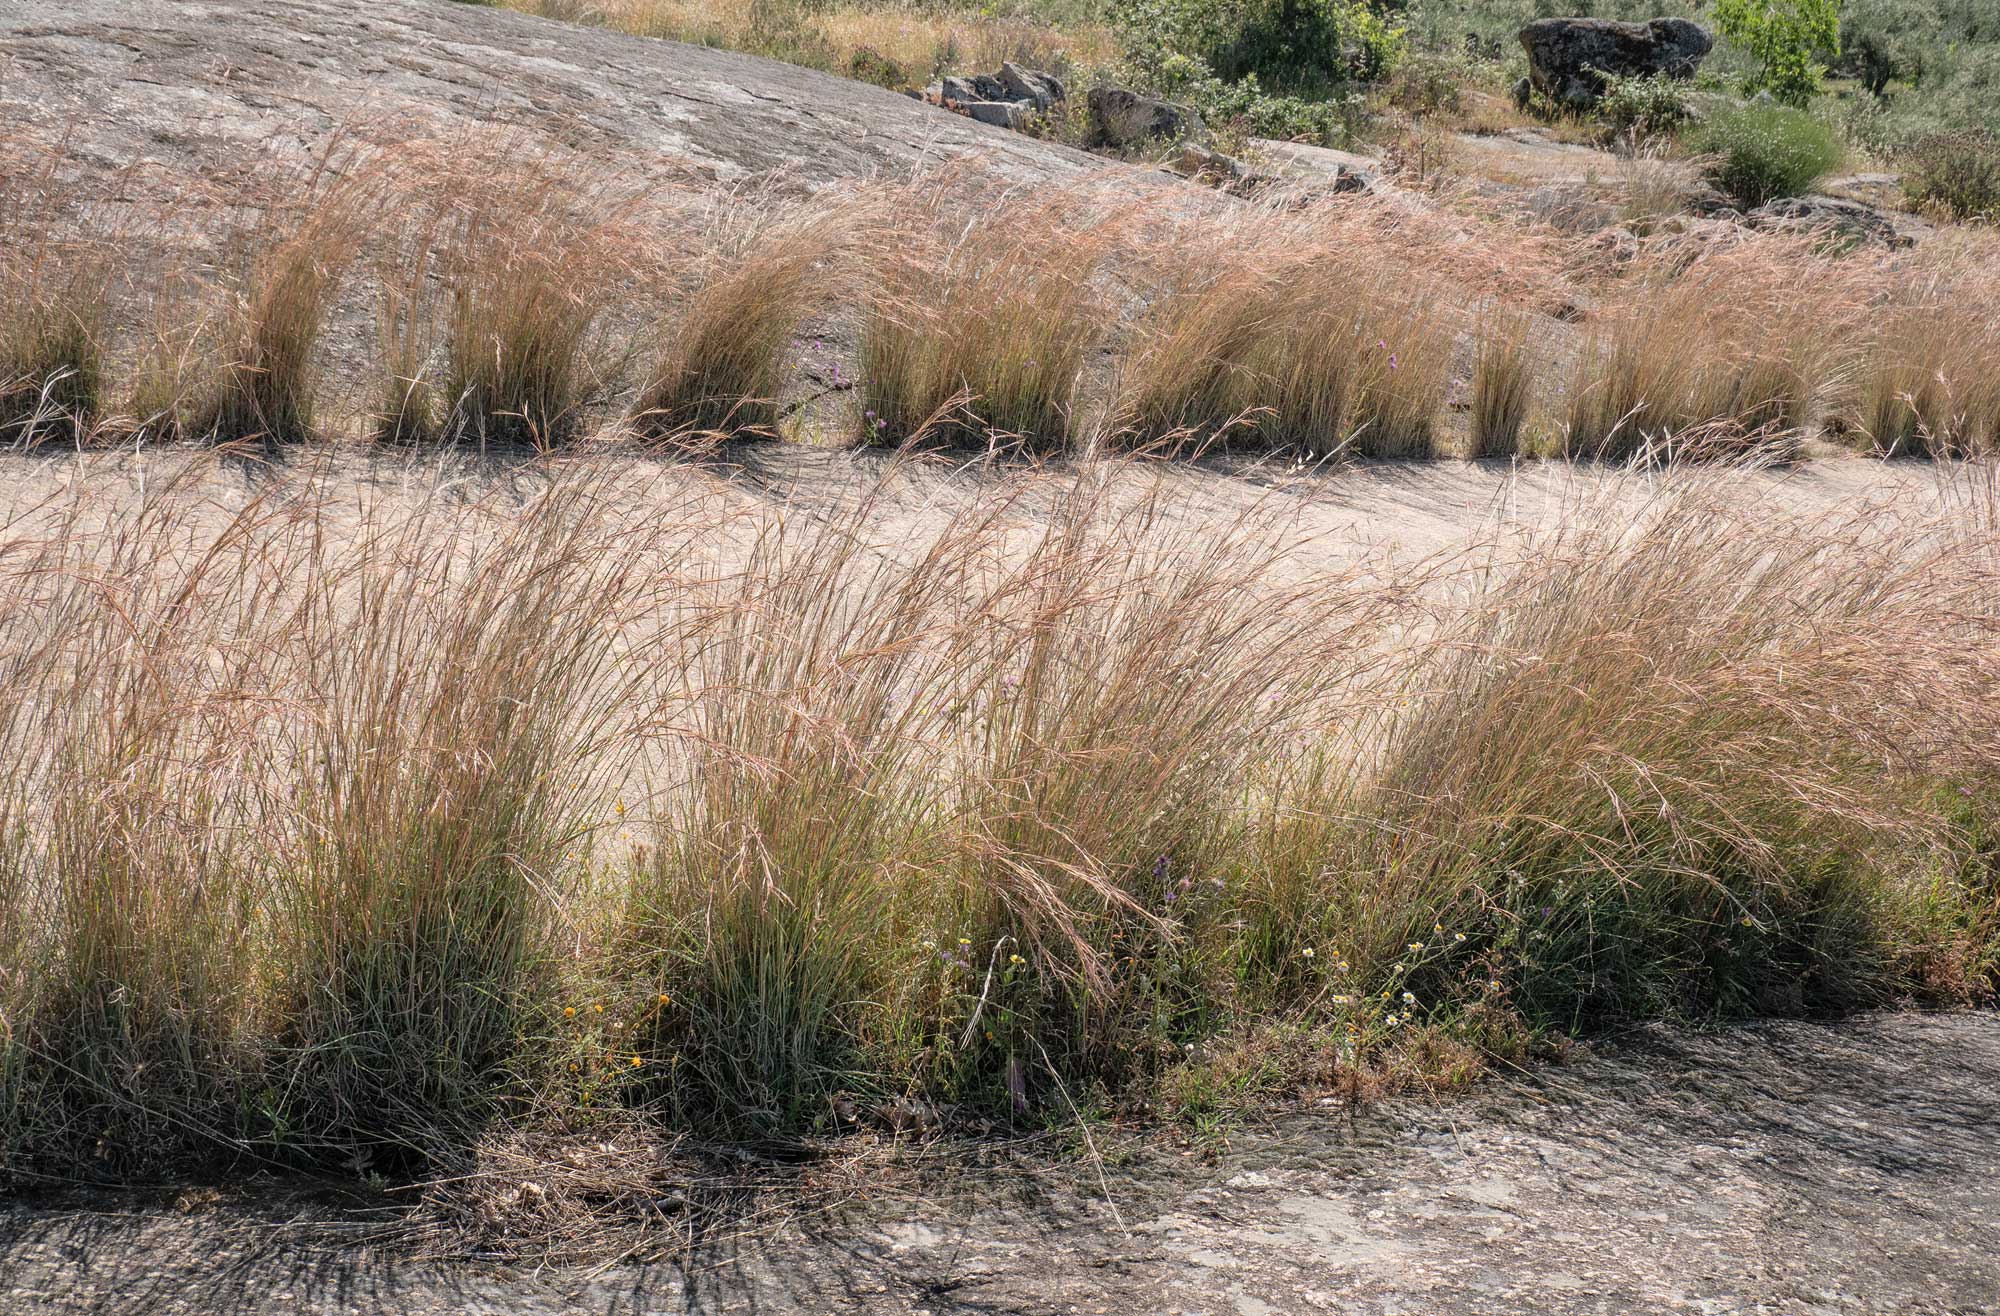 Photograph showing thatching grass growing in Spain. The photo shows clumps of grass growing in two rows extending from left to right. The ground appears to be rock or packed earth.